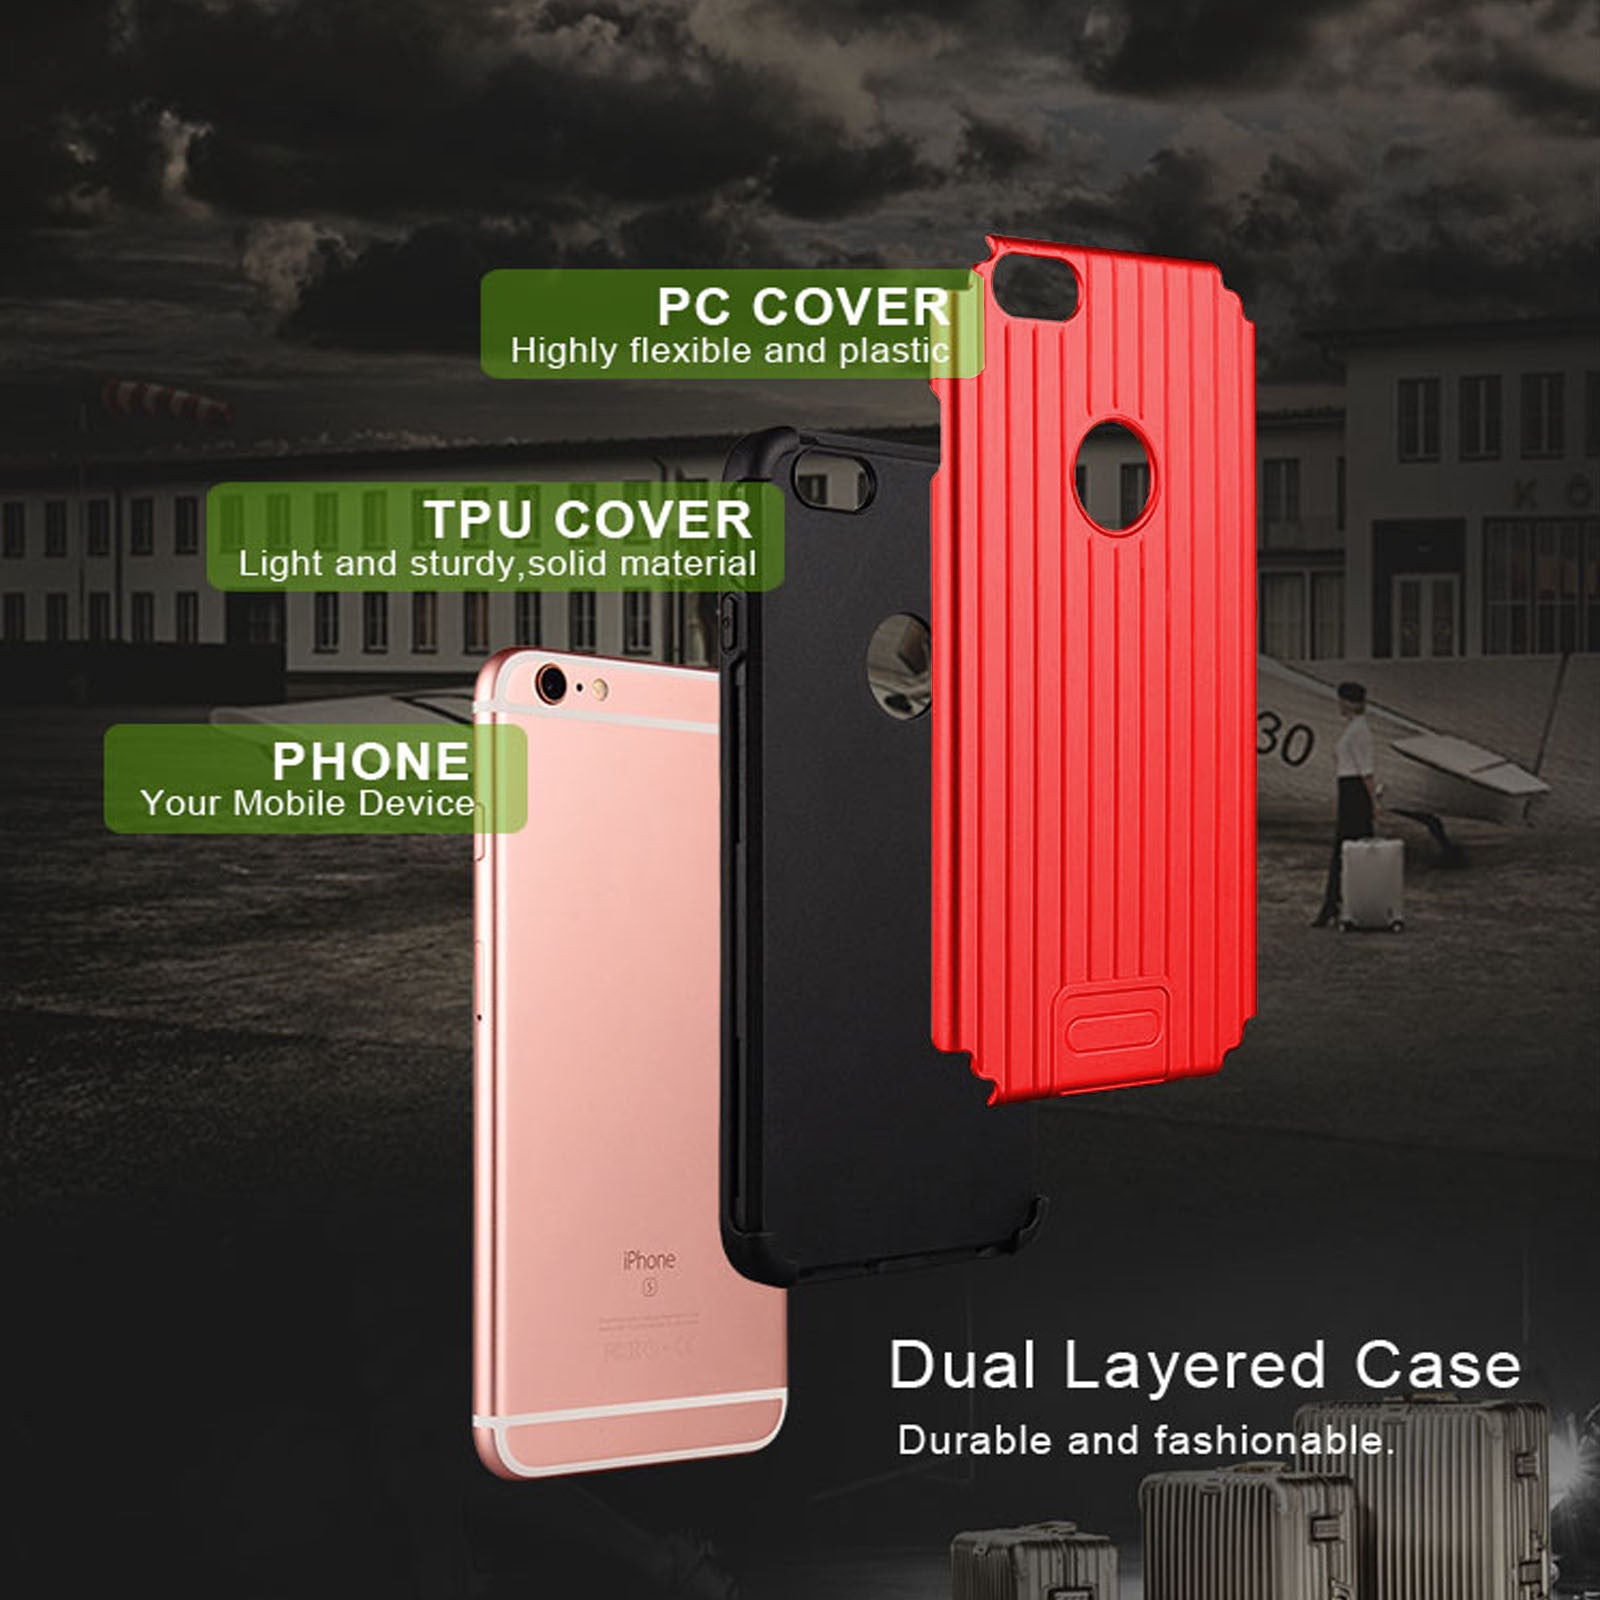 NAVOR Kario Groove Dual Layer Protective Case for 4.7-inch iPhone 6s / 6